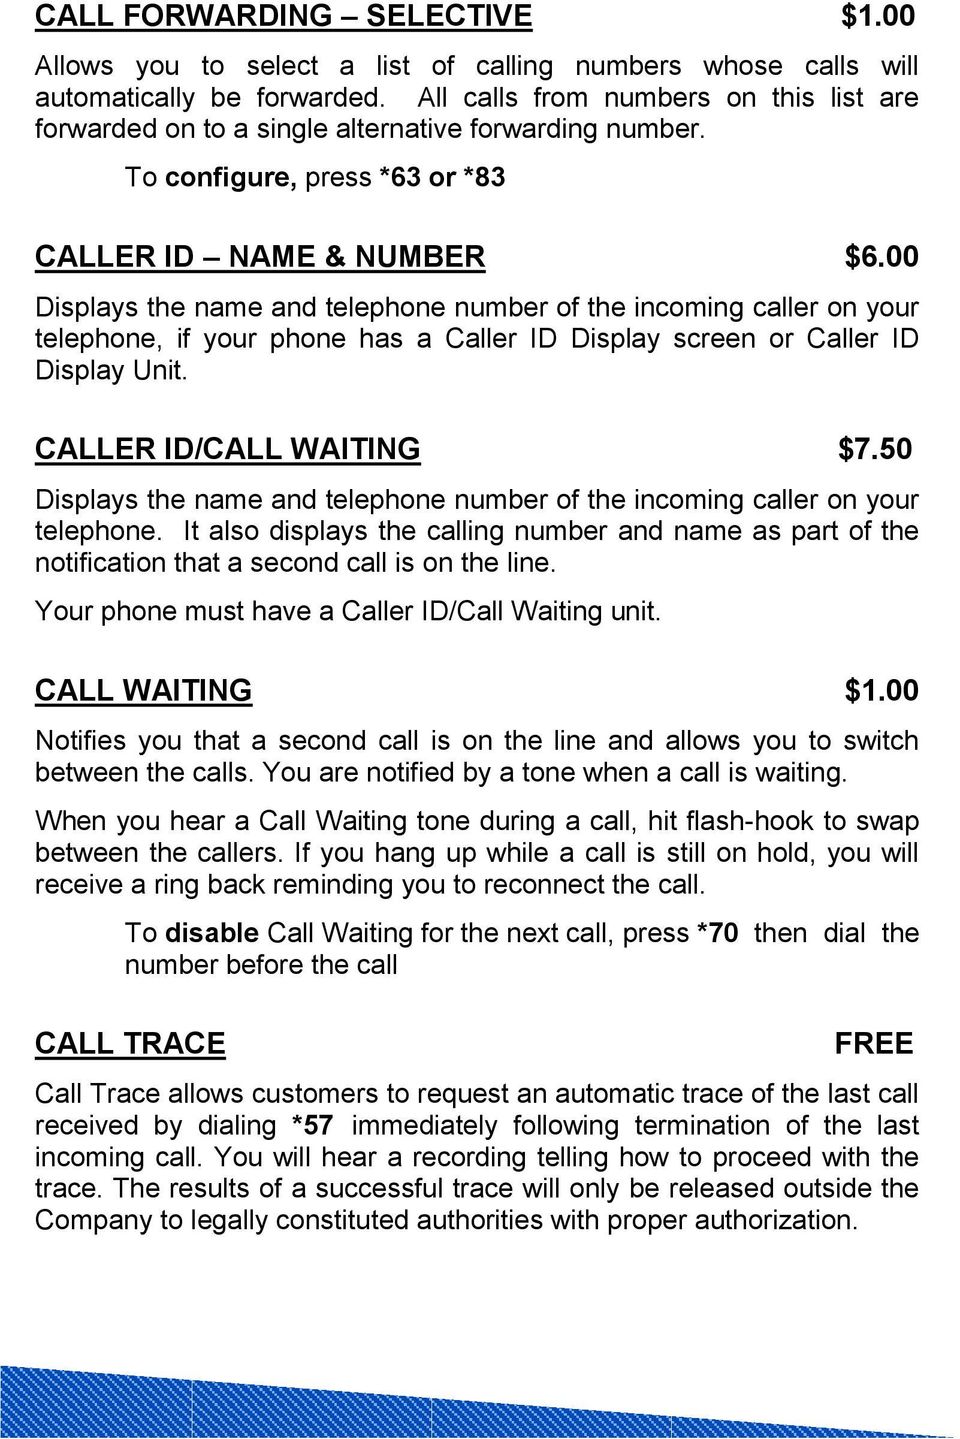 00 Displays the name and telephone number of the incoming caller on your telephone, if your phone has a Caller ID Display screen or Caller ID Display Unit. CALLER ID/CALL WAITING $7.